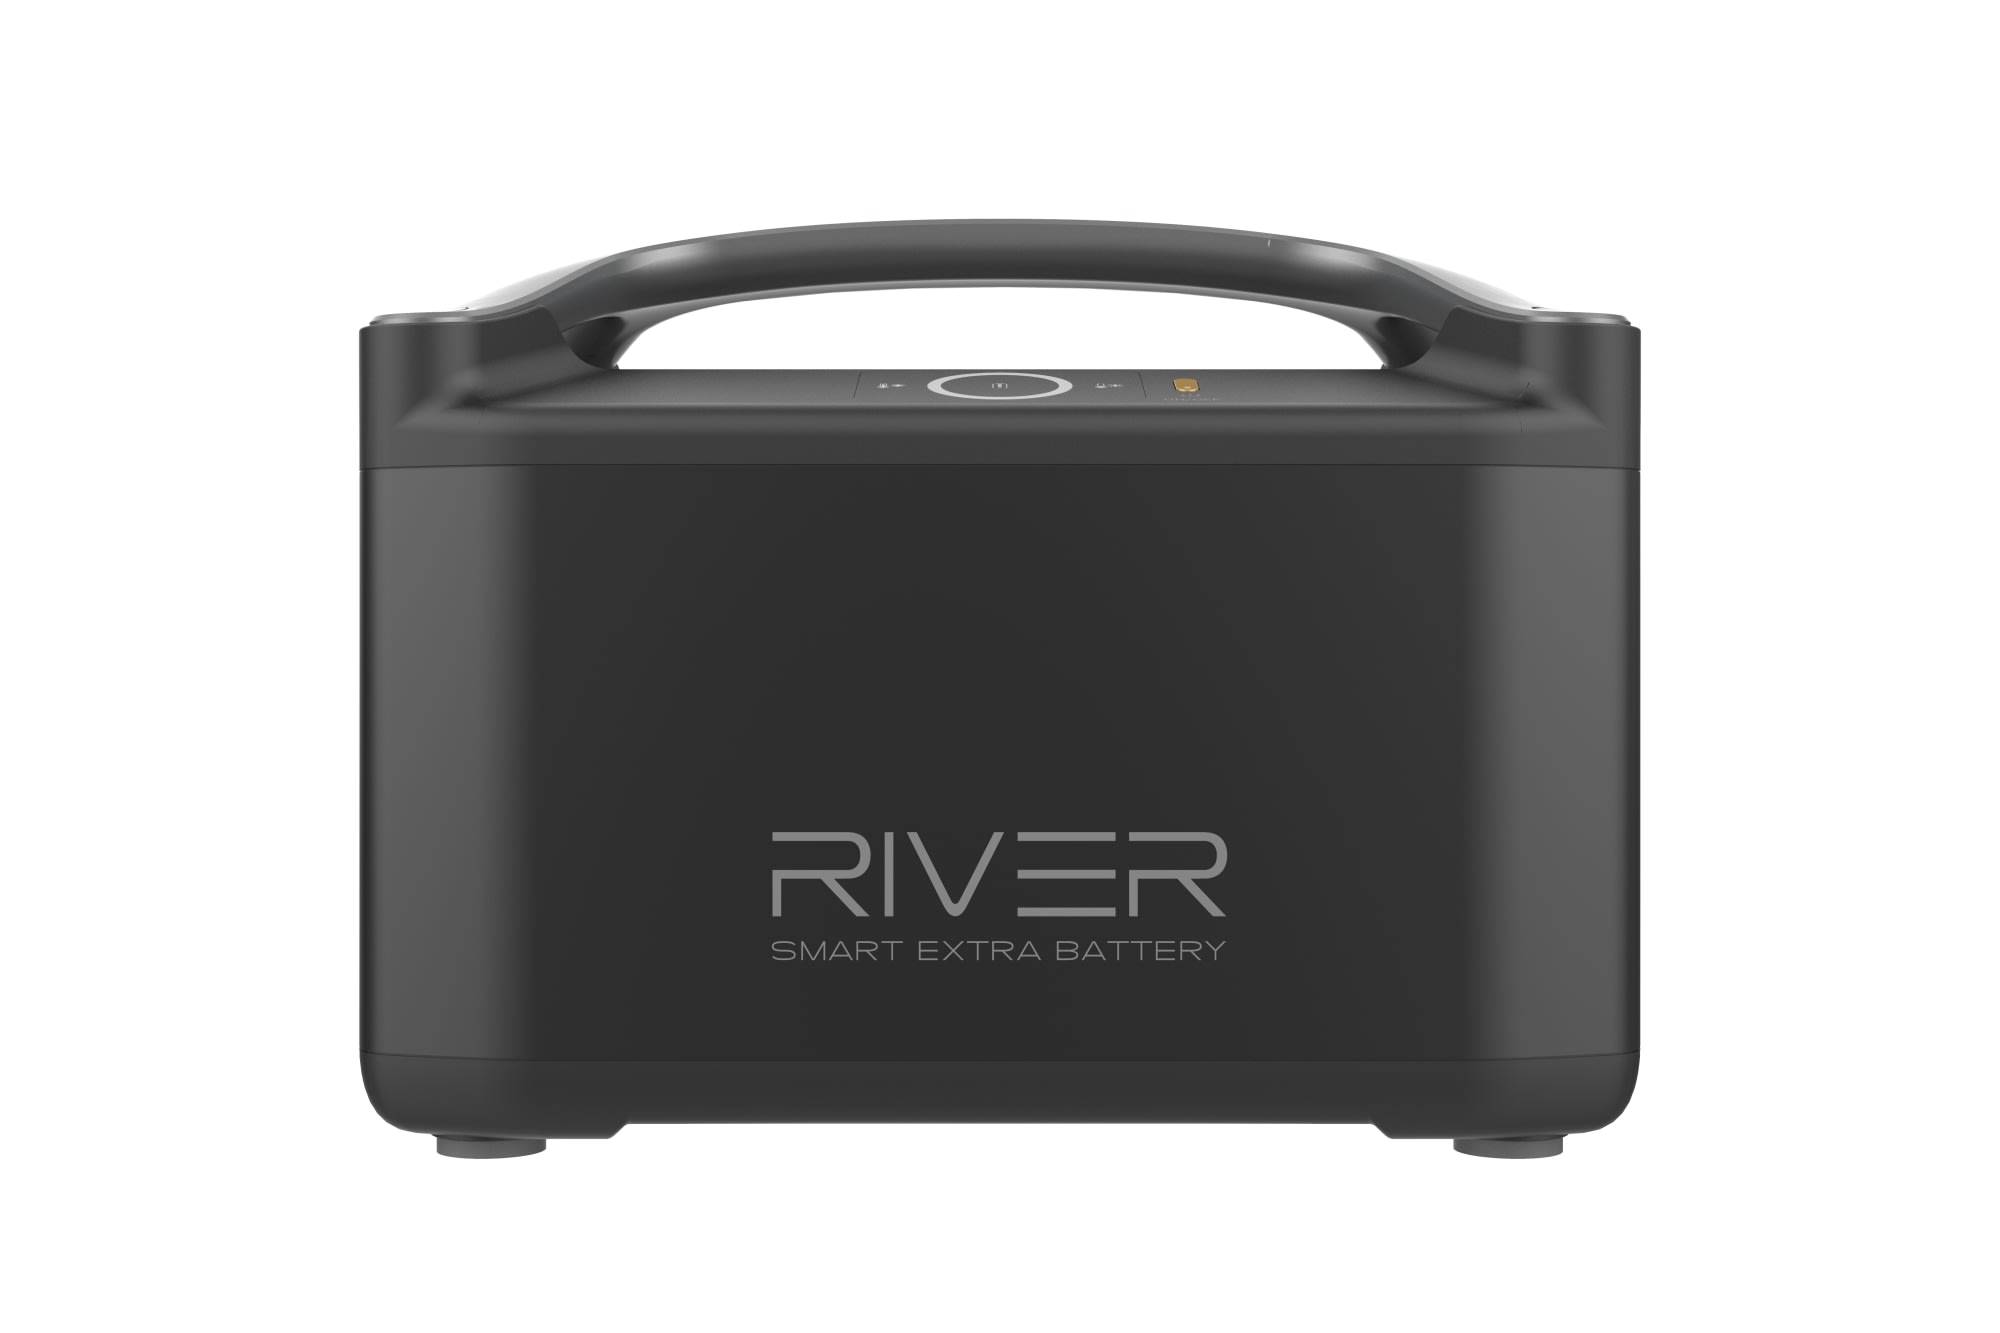 EcoFlow ポータブル電源 RIVER Pro 720Wh - 防災関連グッズ